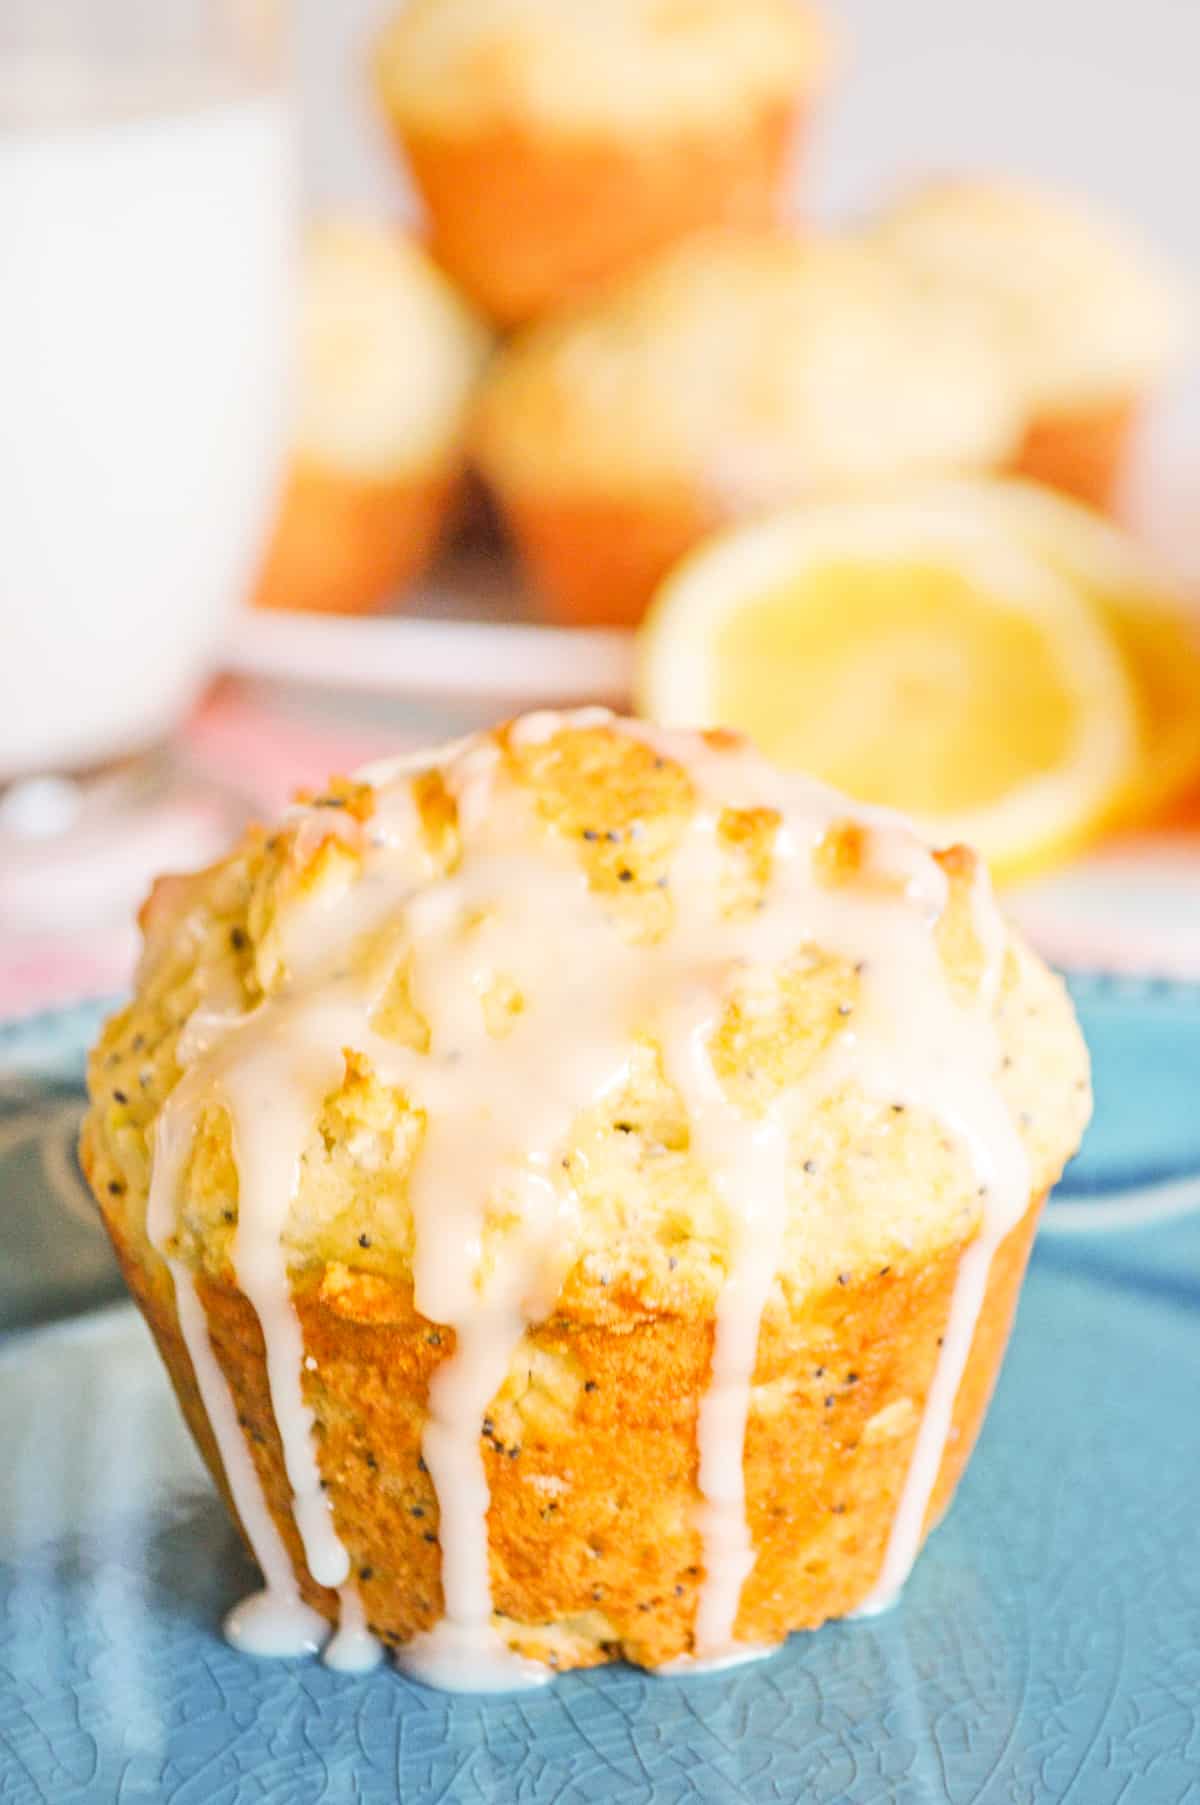 Lemon poppy seed muffin drizzled with lemon glaze which is dripping down the sides. Additional muffins and sliced lemons are behind the muffin.